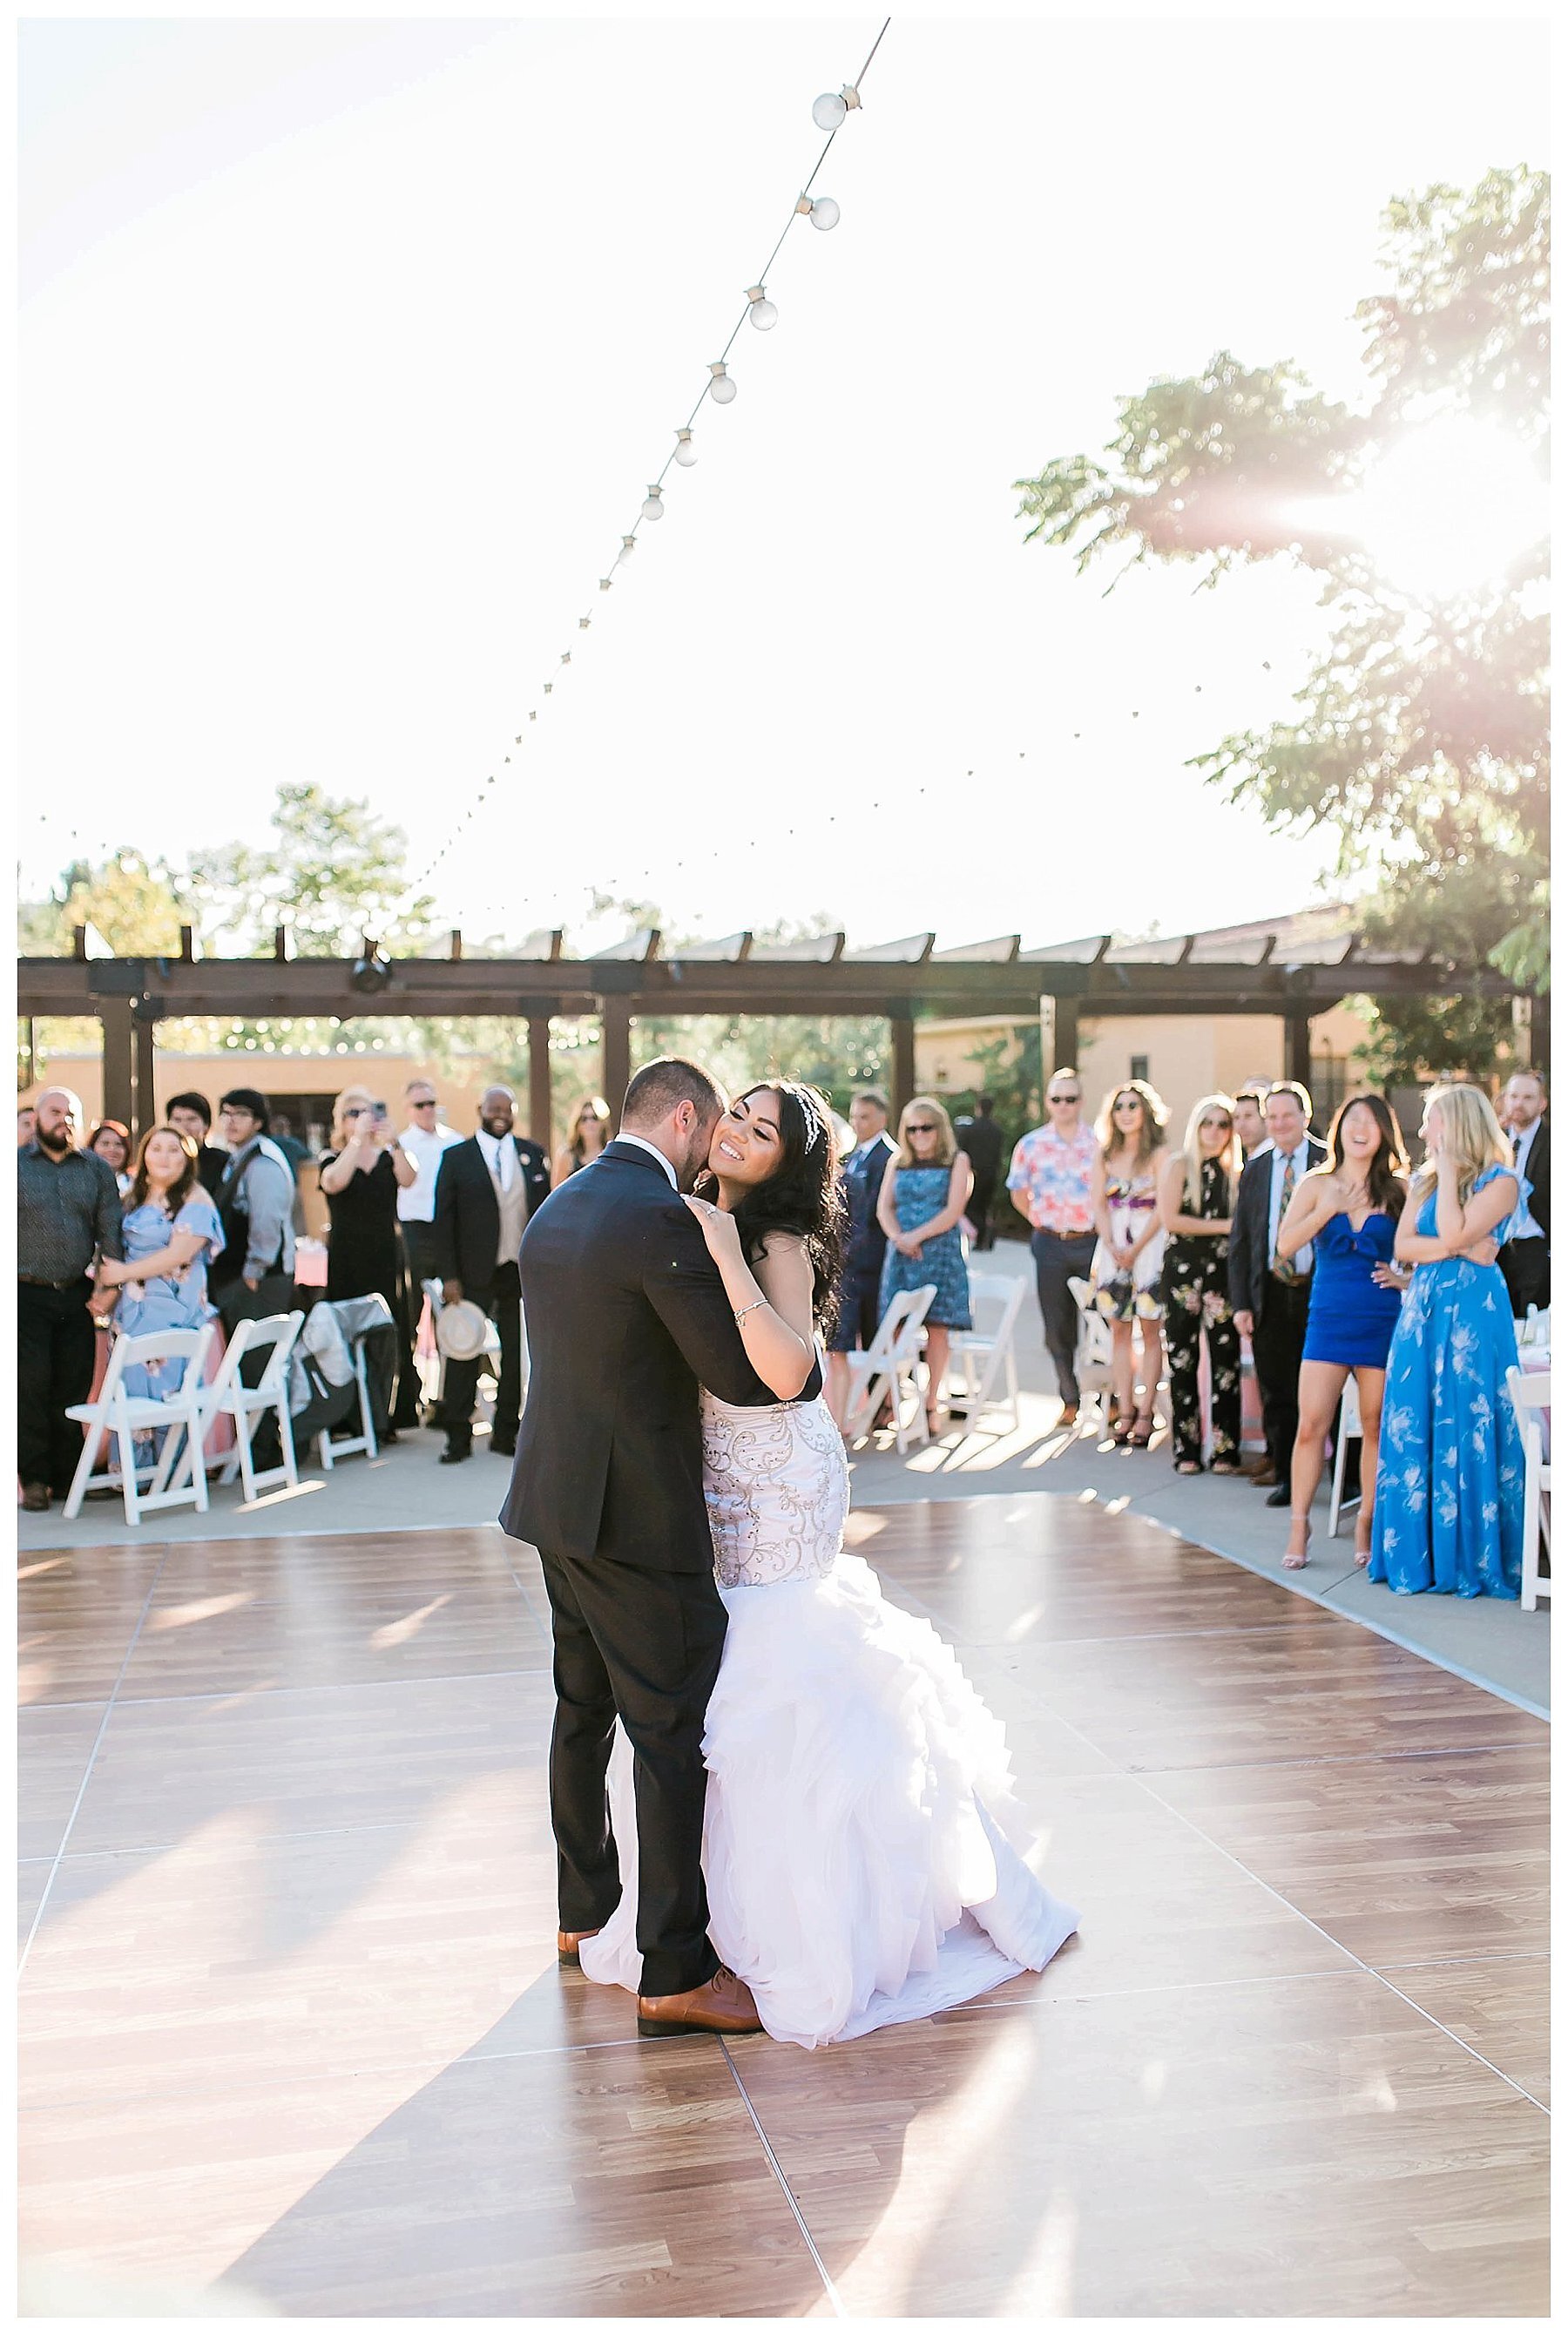  bride and groom sharing their first dance 